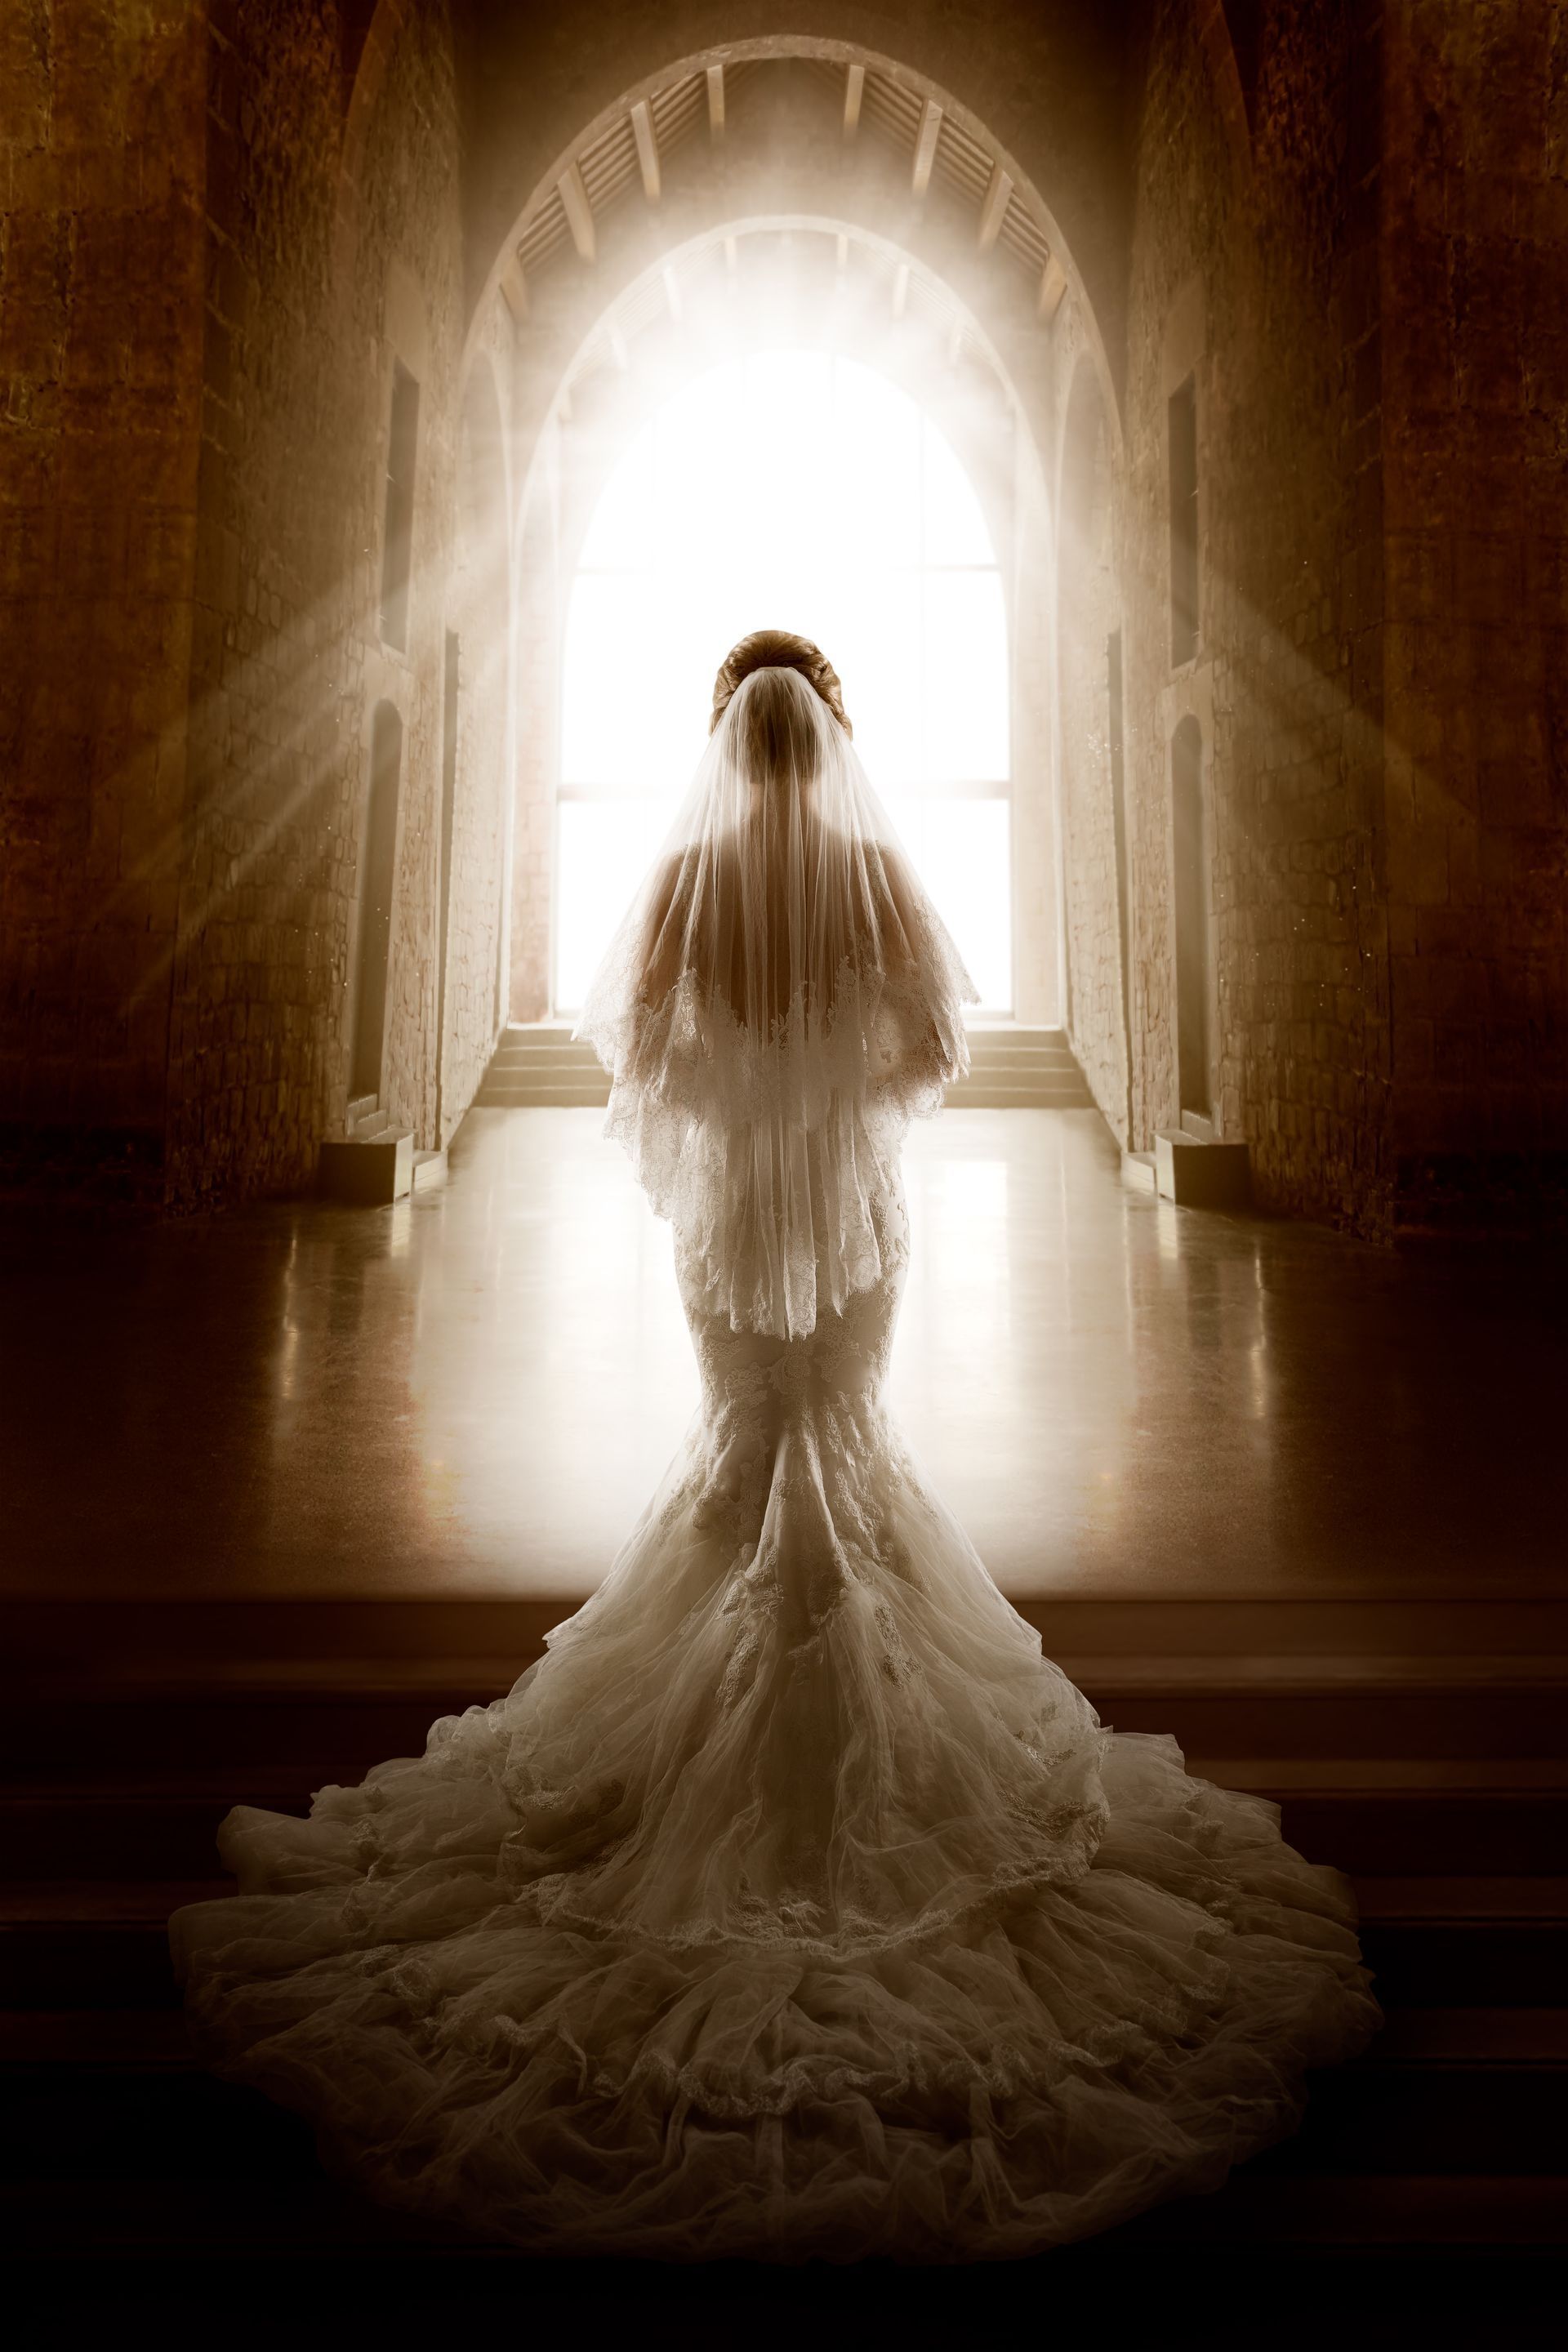 A bride in a wedding dress and veil is standing in front of a window.